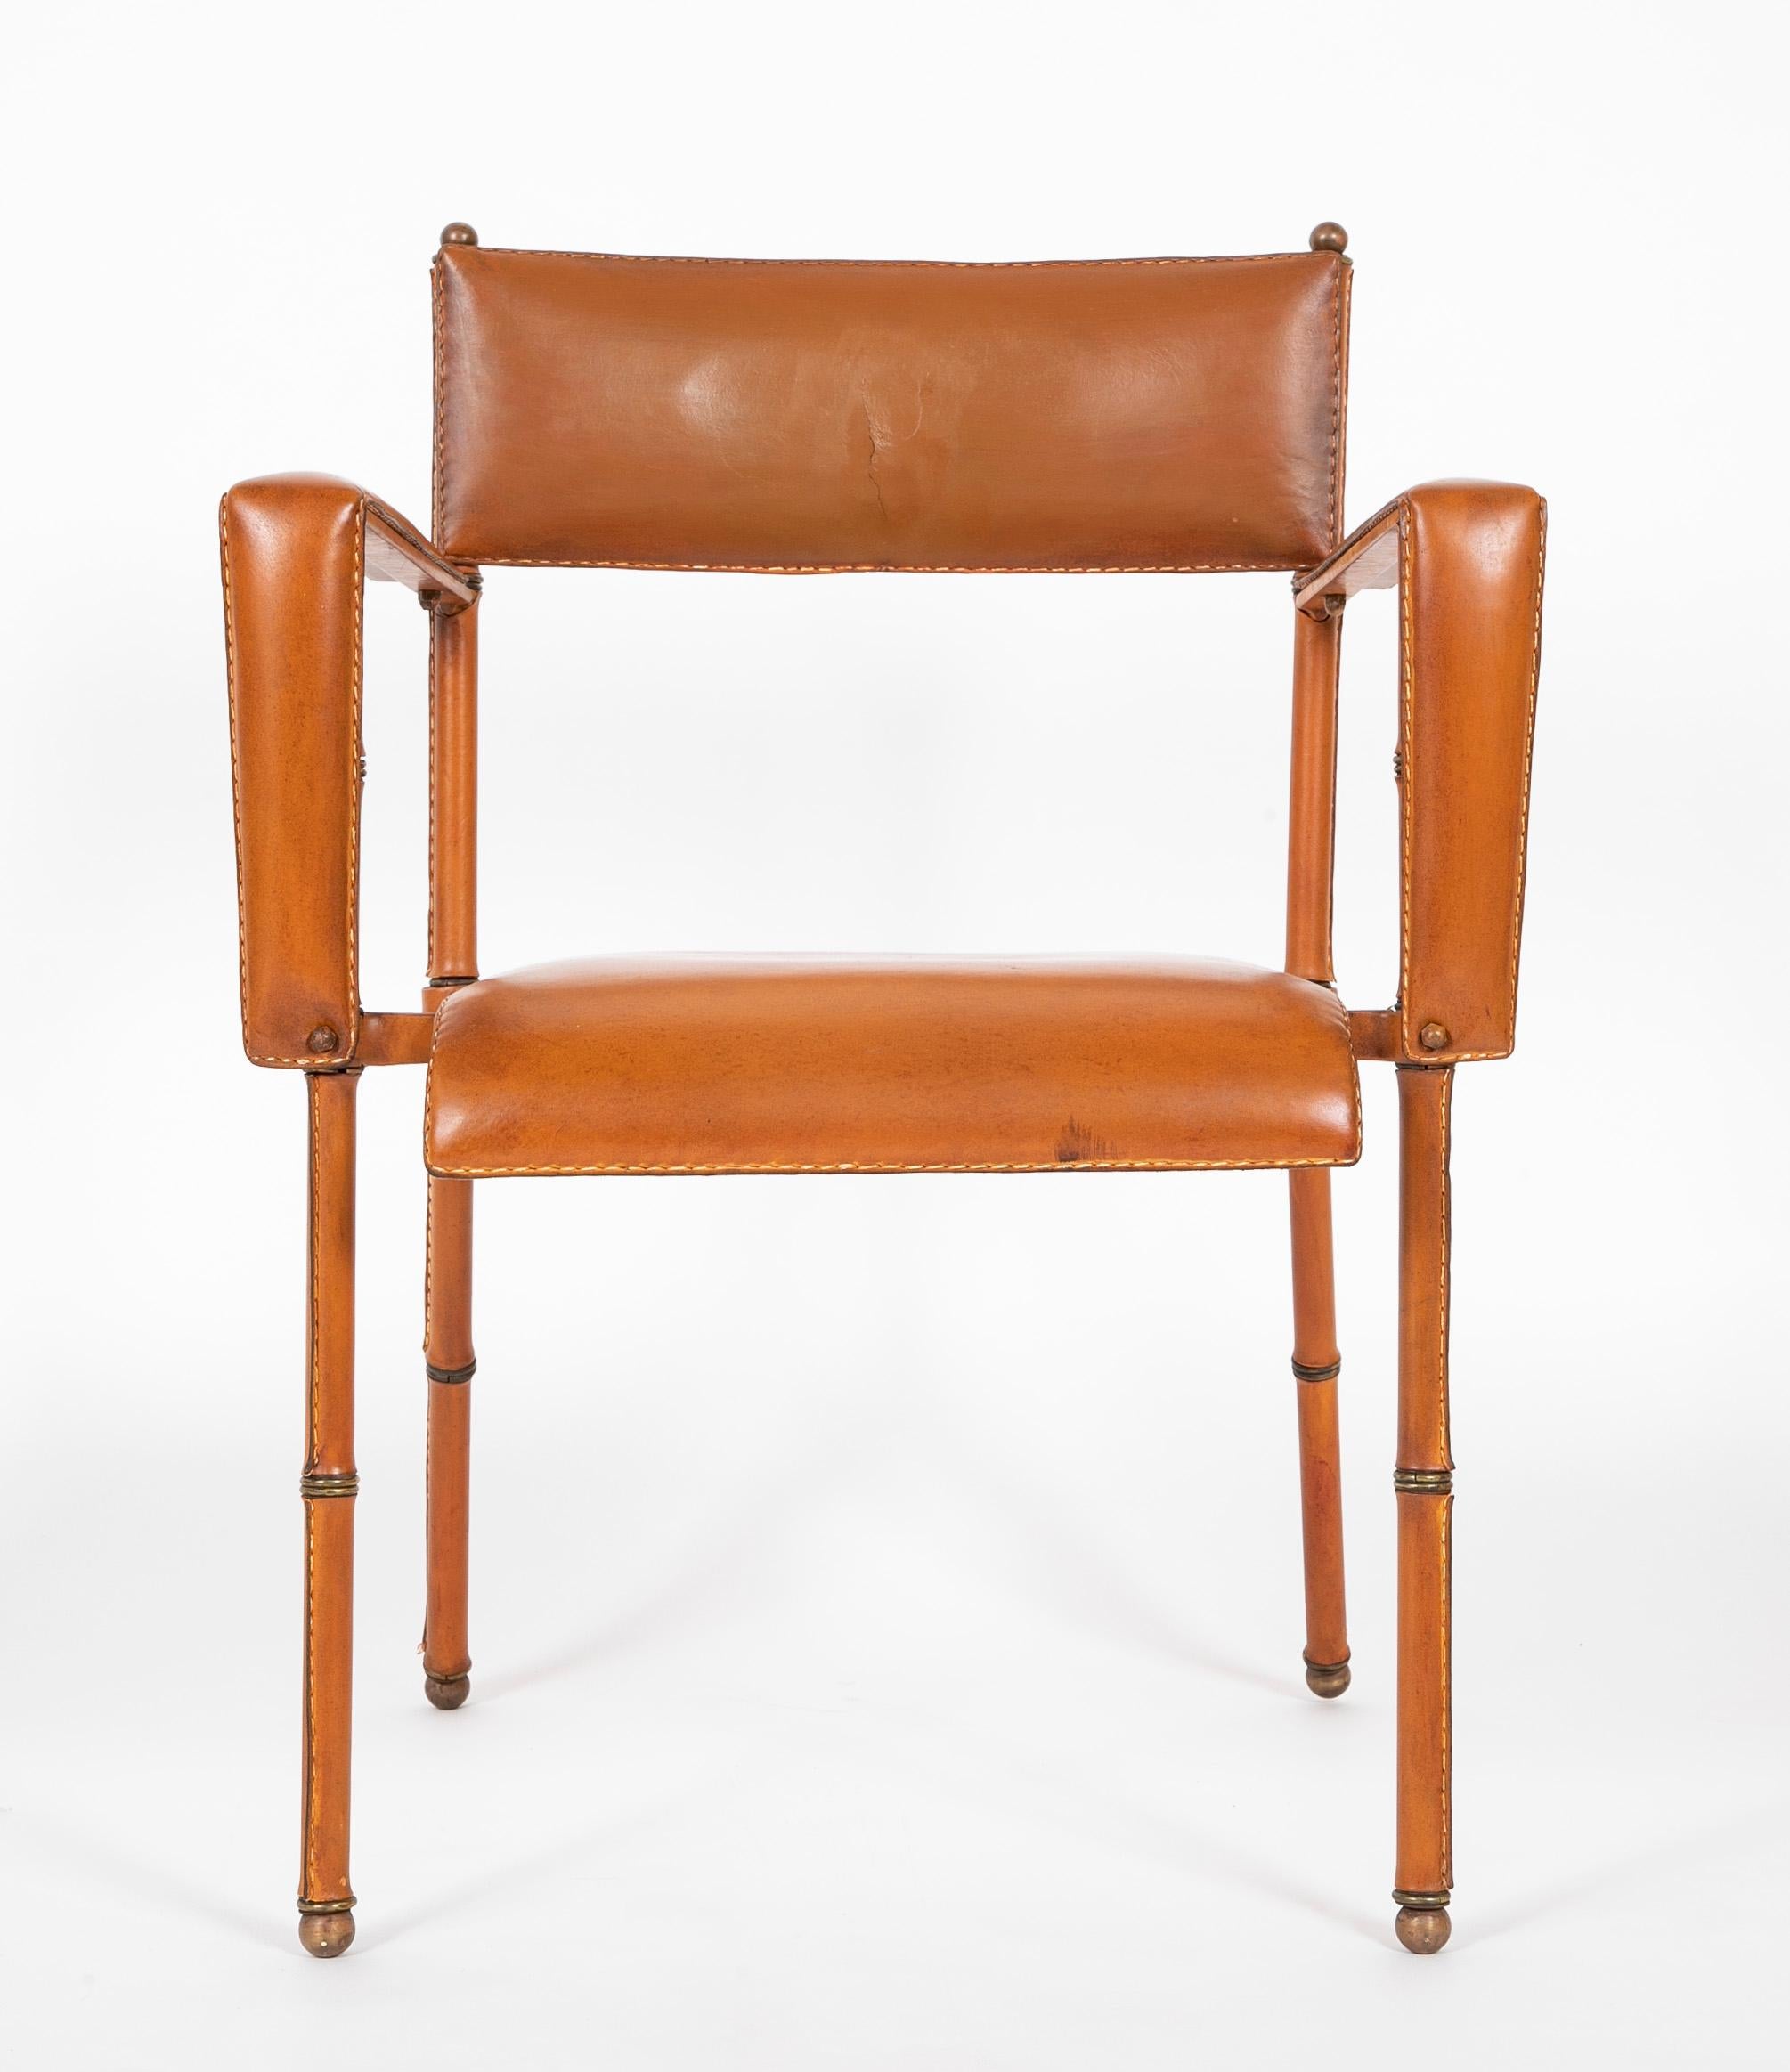 A hand stiched leather desk chair by French designer Jacques Adnet. featuring a tubular steel frame, upholstered with patinated leather. Adnet introduced the frame in combination with leather, which was an ingenious move; maintaining the avant-garde